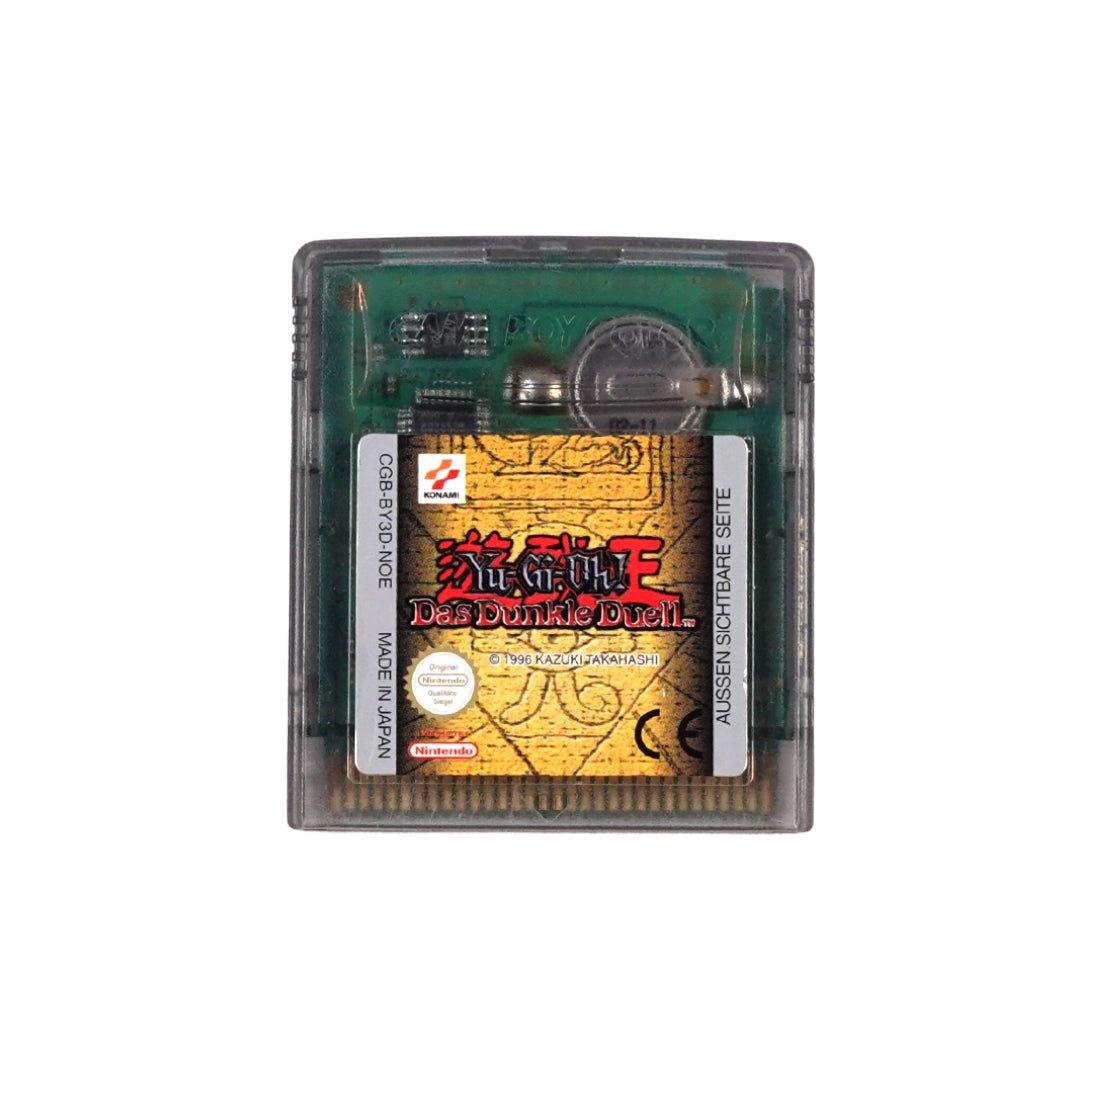 (Pre-Owned) Yu-Gi-Oh! German Edition - Gameboy Classic - Store 974 | ستور ٩٧٤